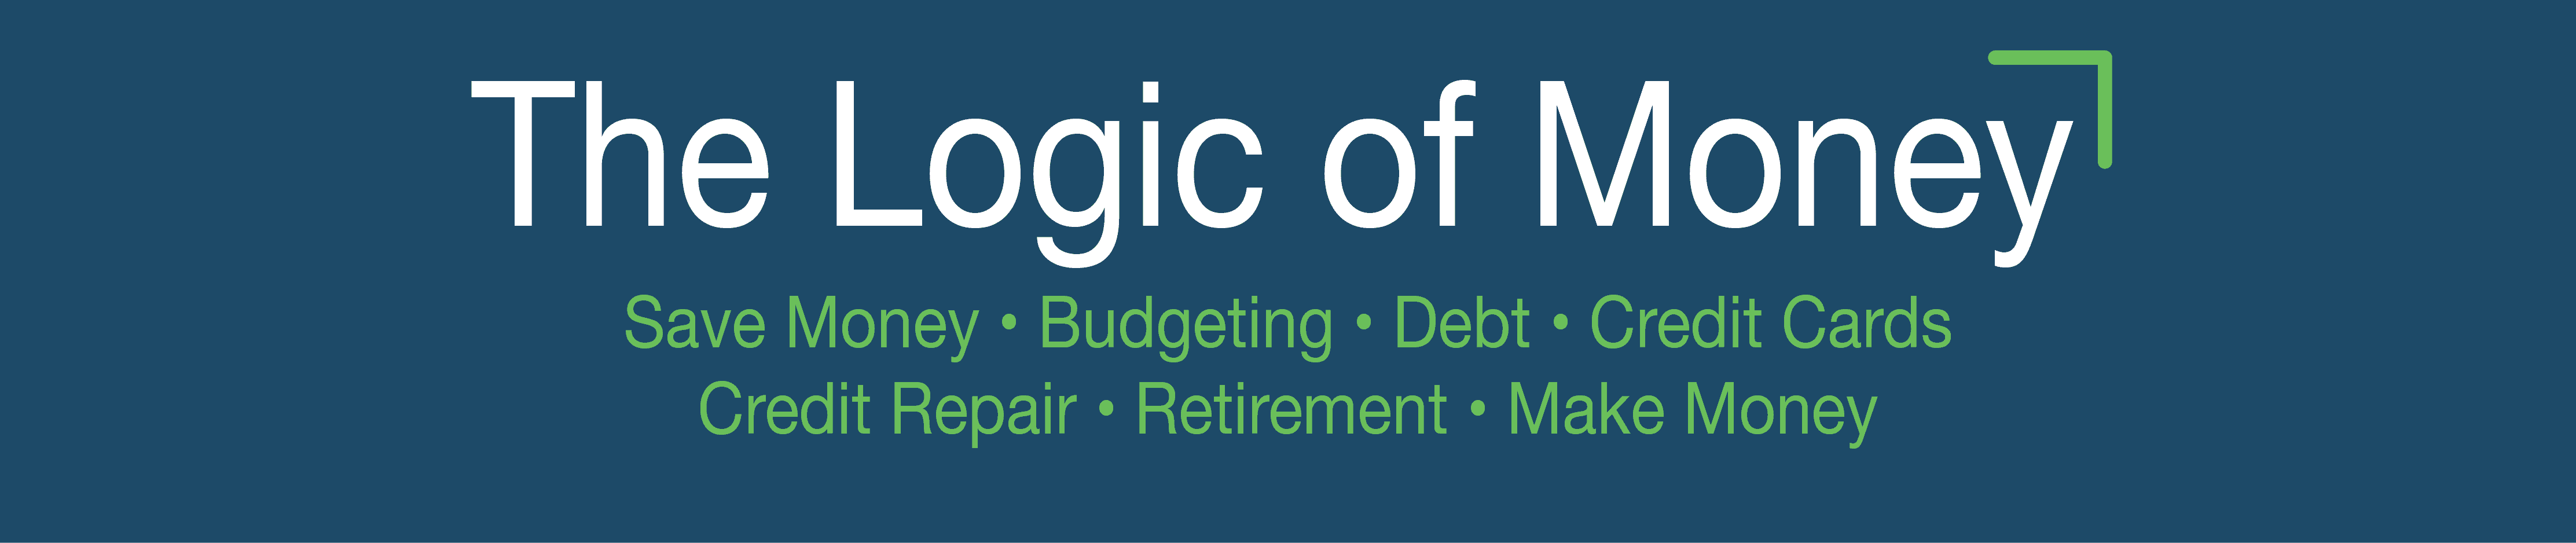 A dark blue banner with the text 'the logic of money' followed by a list of financial topics, including saving money, budgeting, debt, credit cards, credit repair, retirement, and making money.